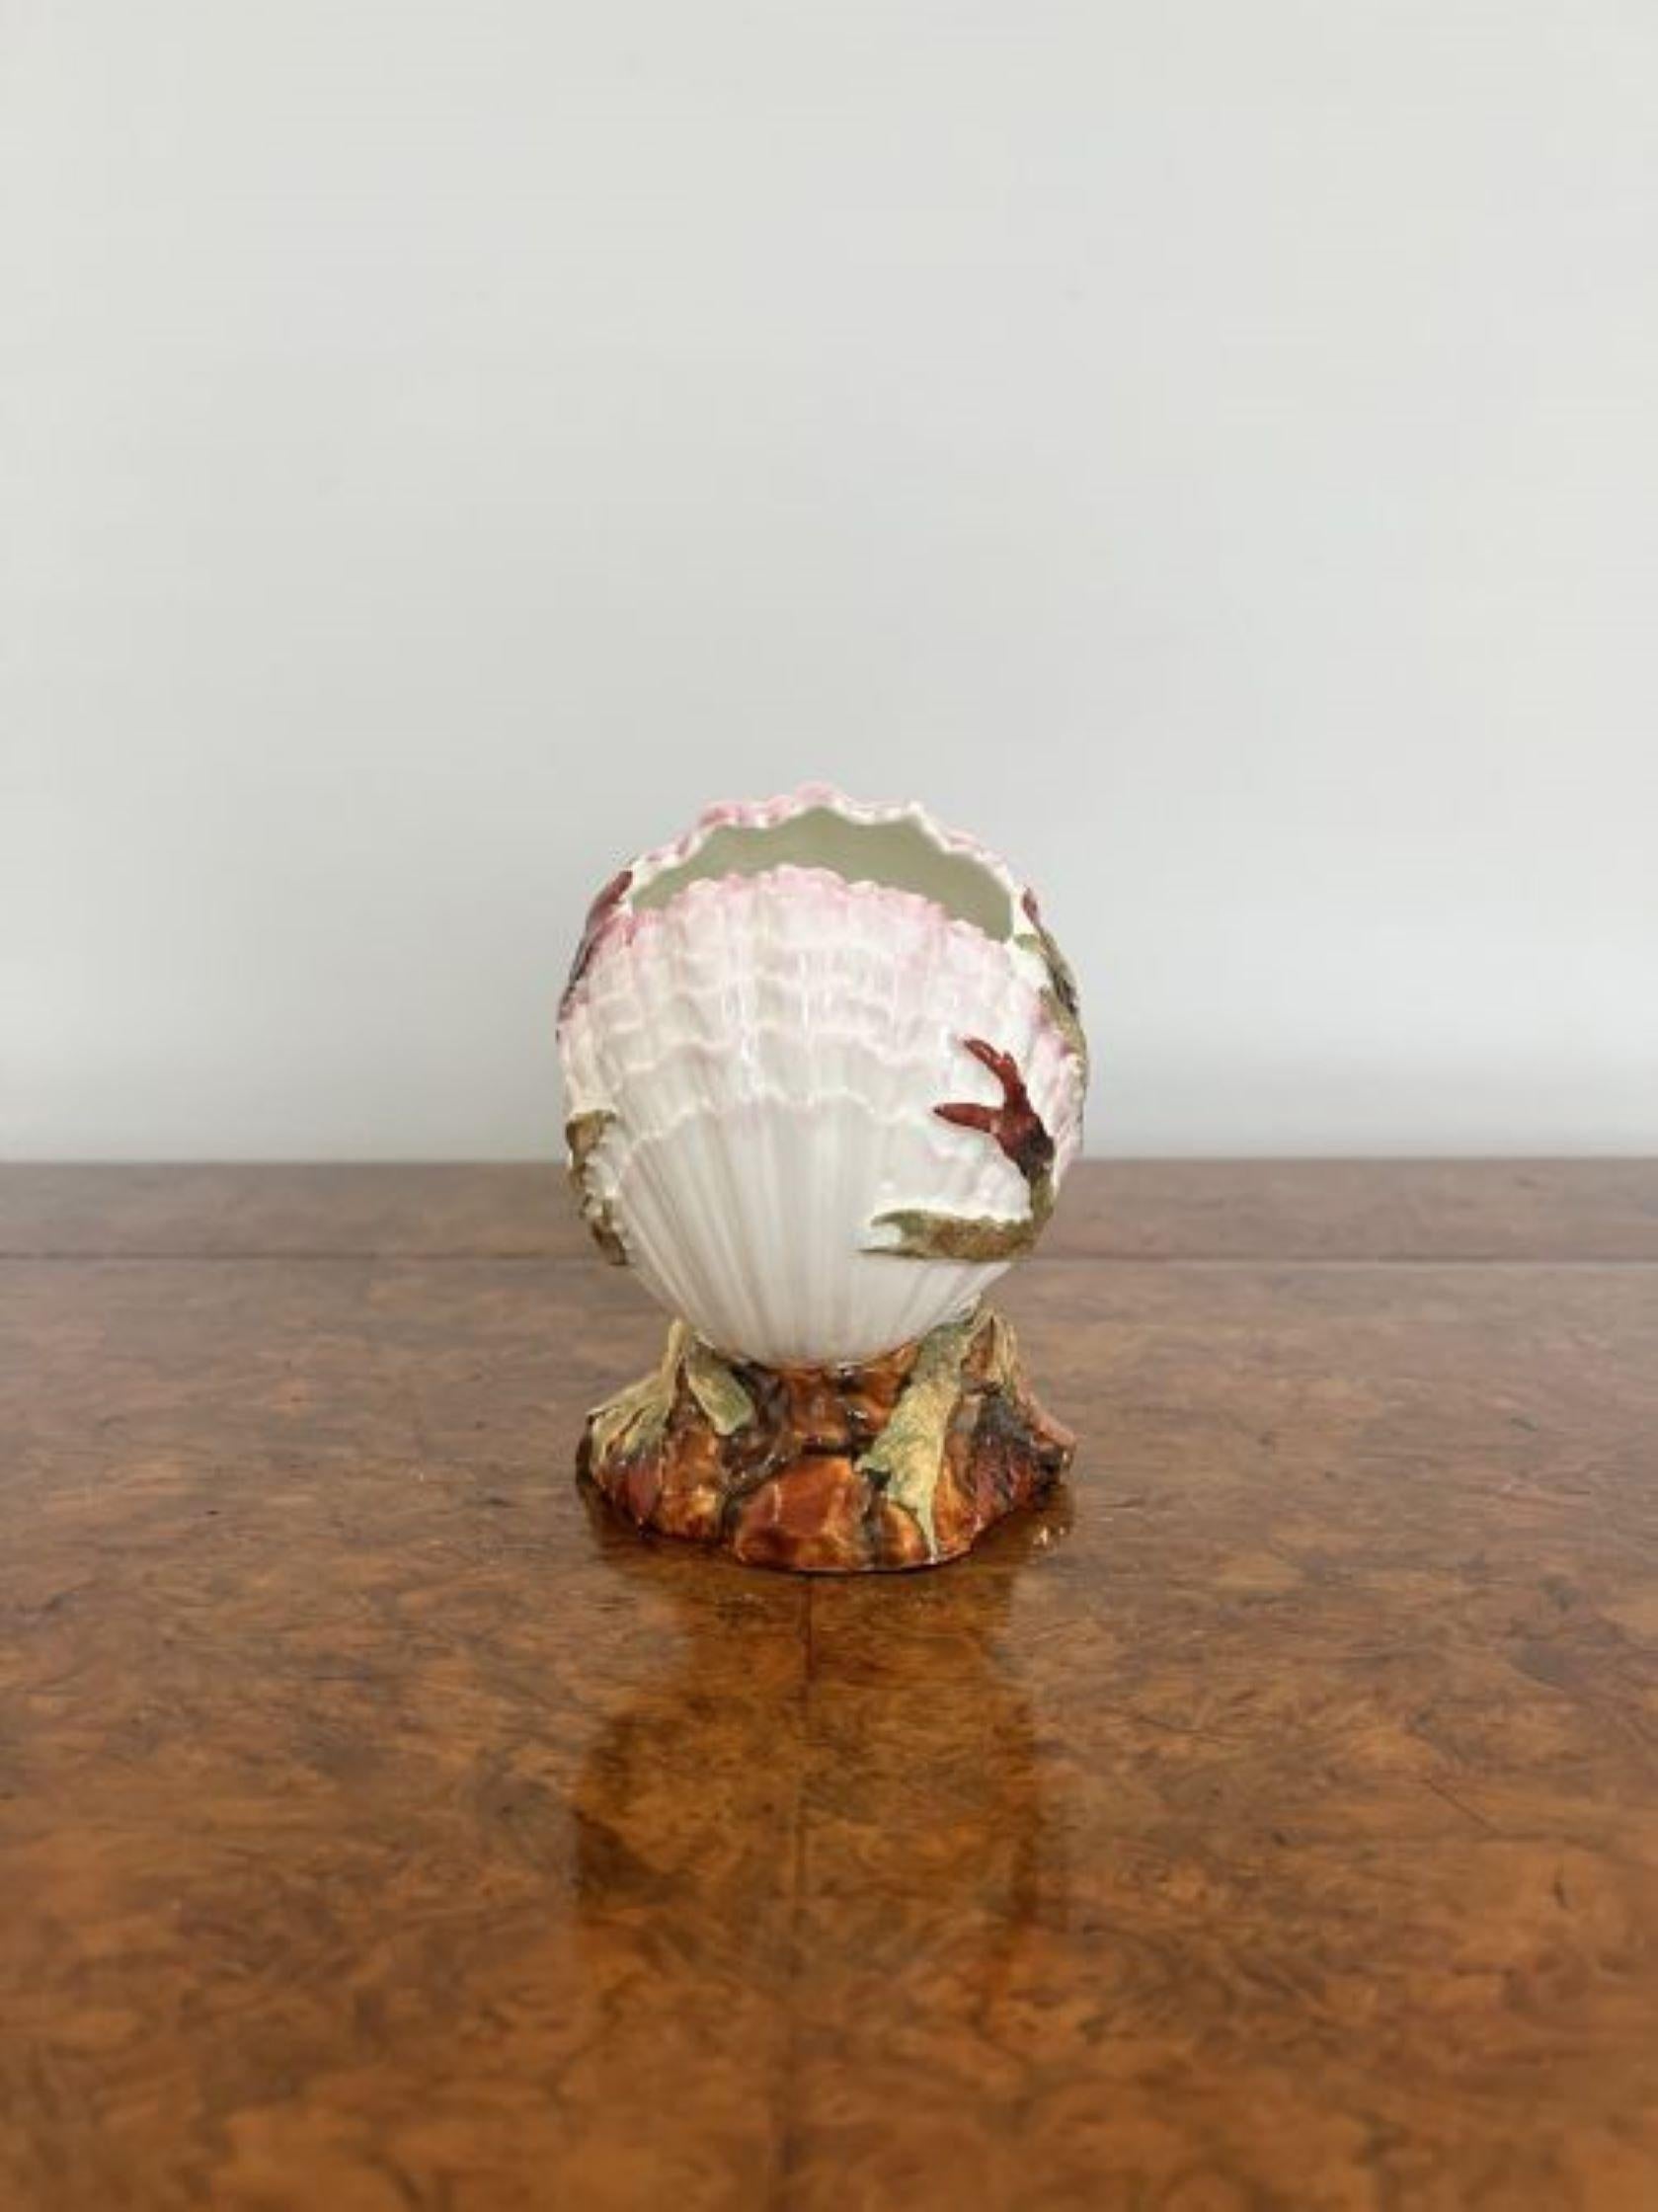 Quality antique Victorian porcelain clam vase having a quality antique Victorian porcelain clam vase hand painted in wonderful white, orange, red and green colours.